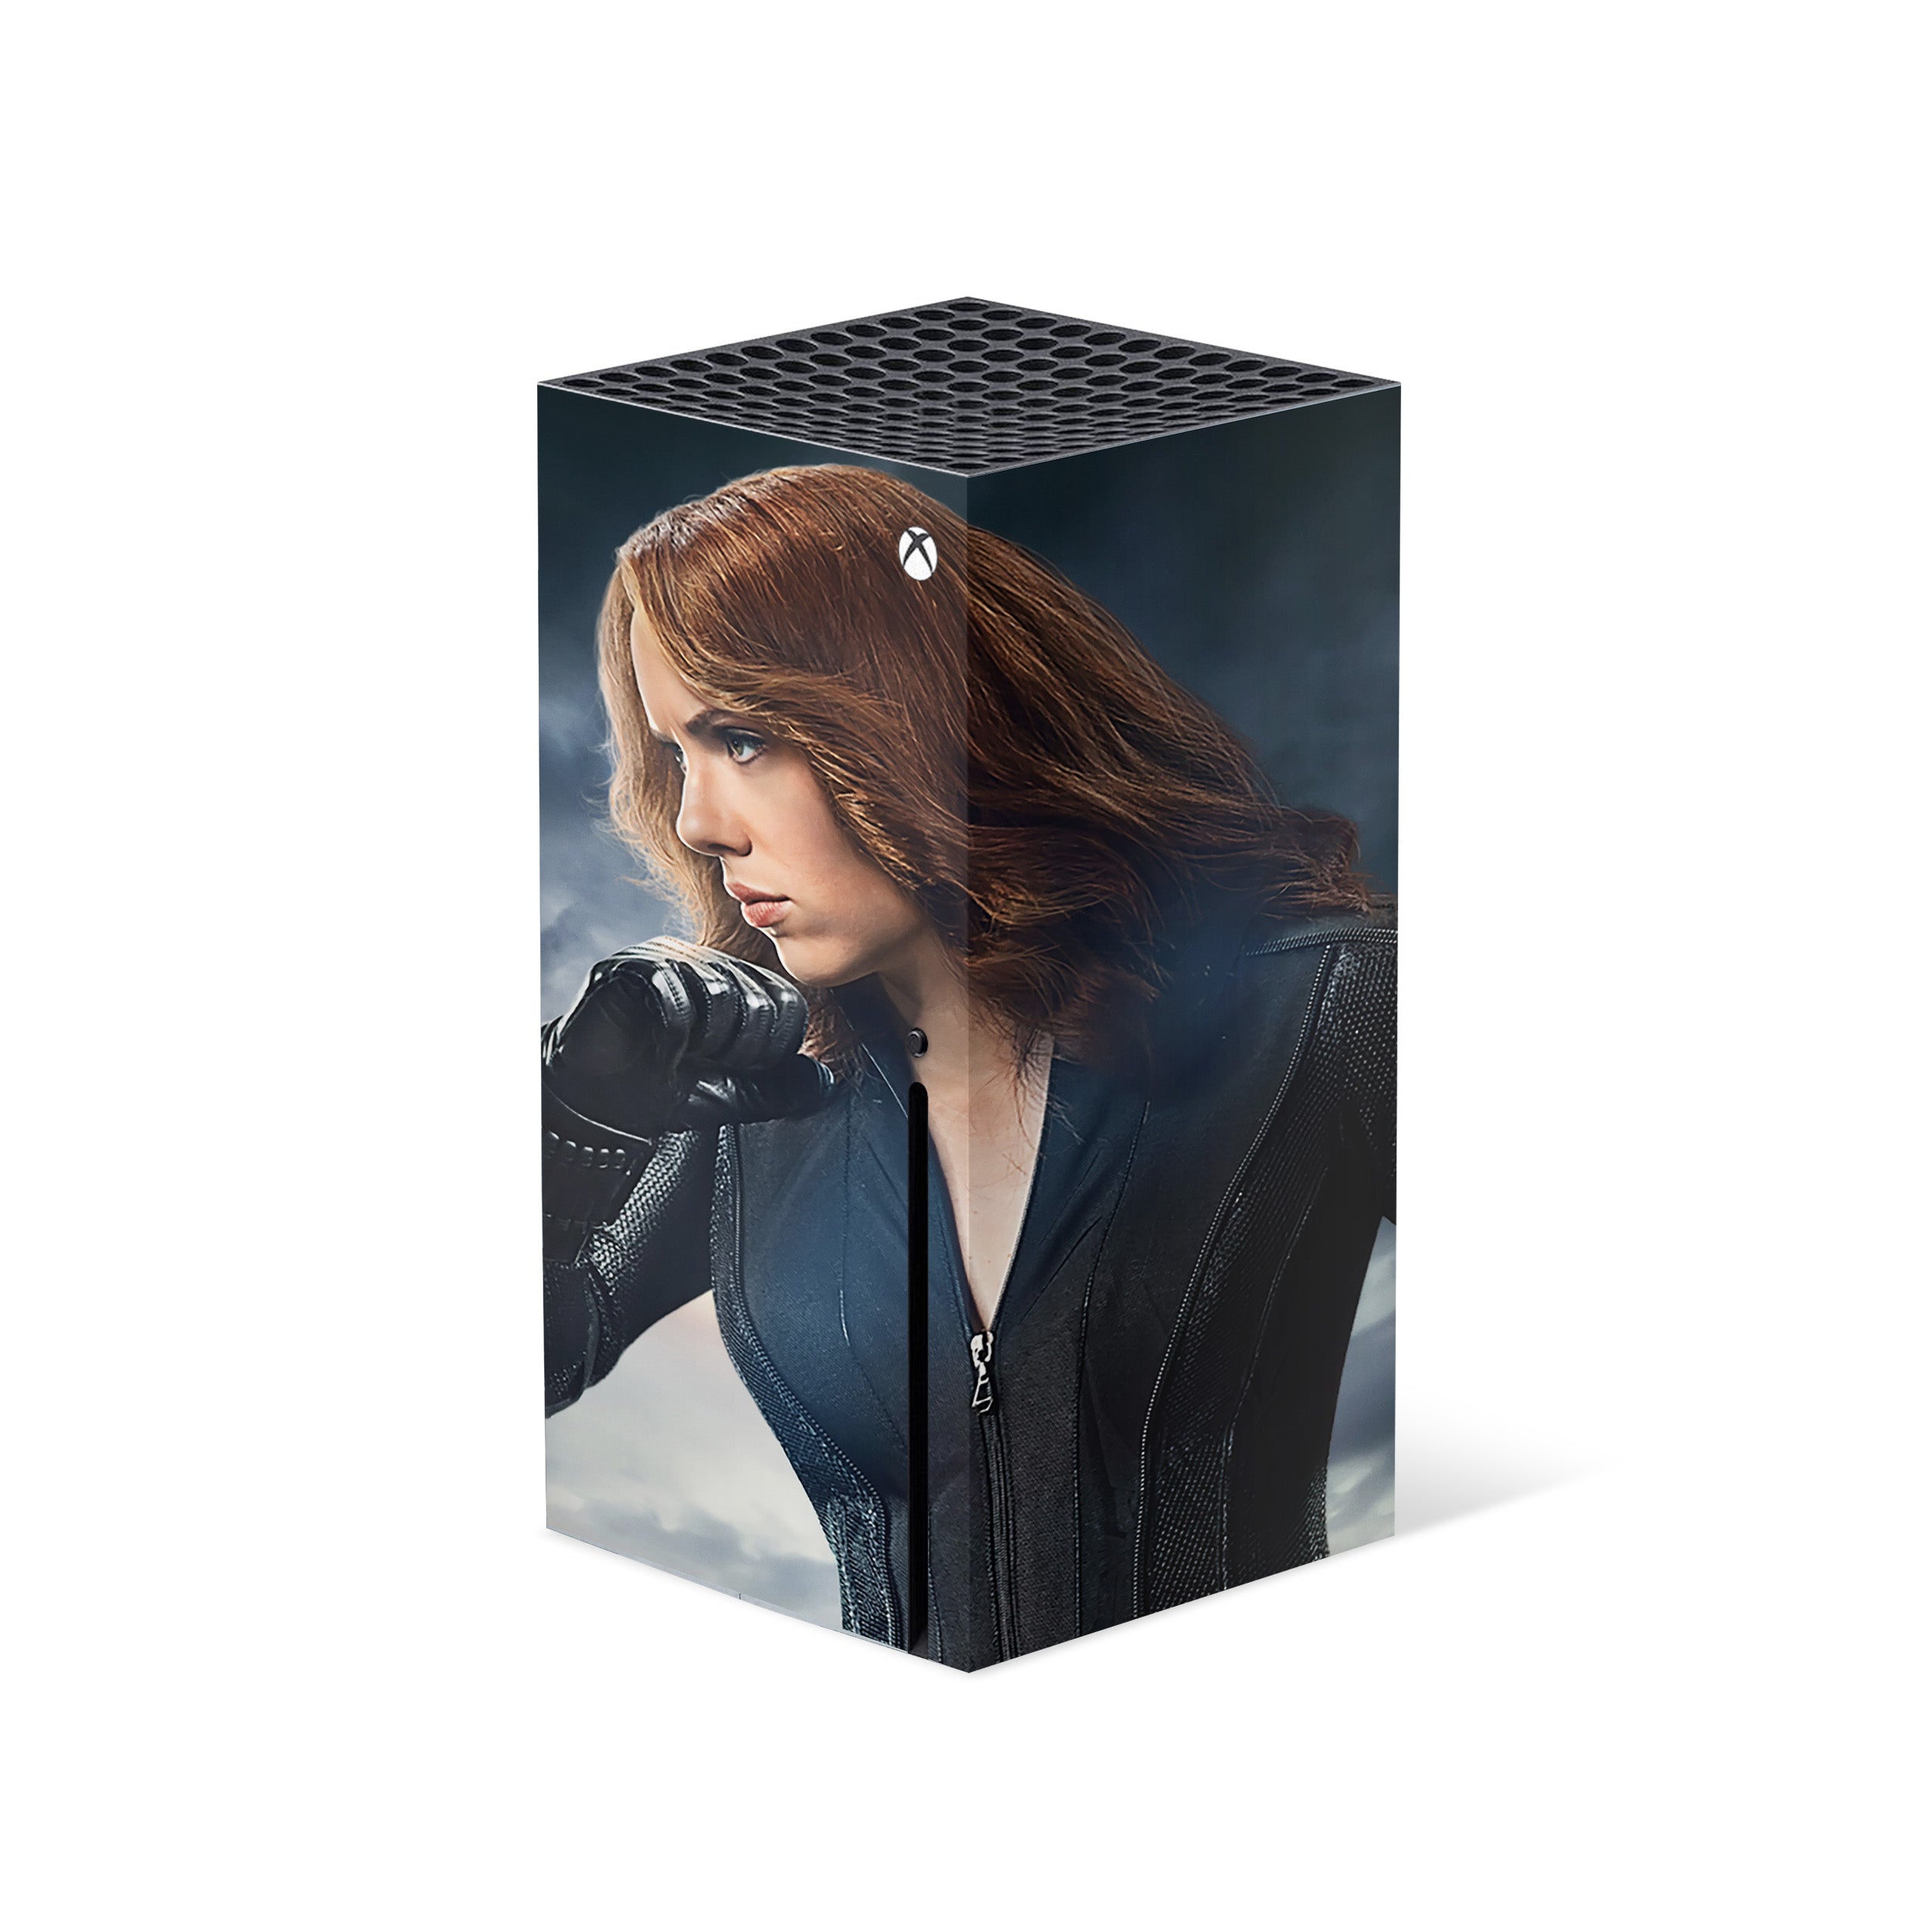 A video game skin featuring a Marvel Black Widow design for the Xbox Series X.